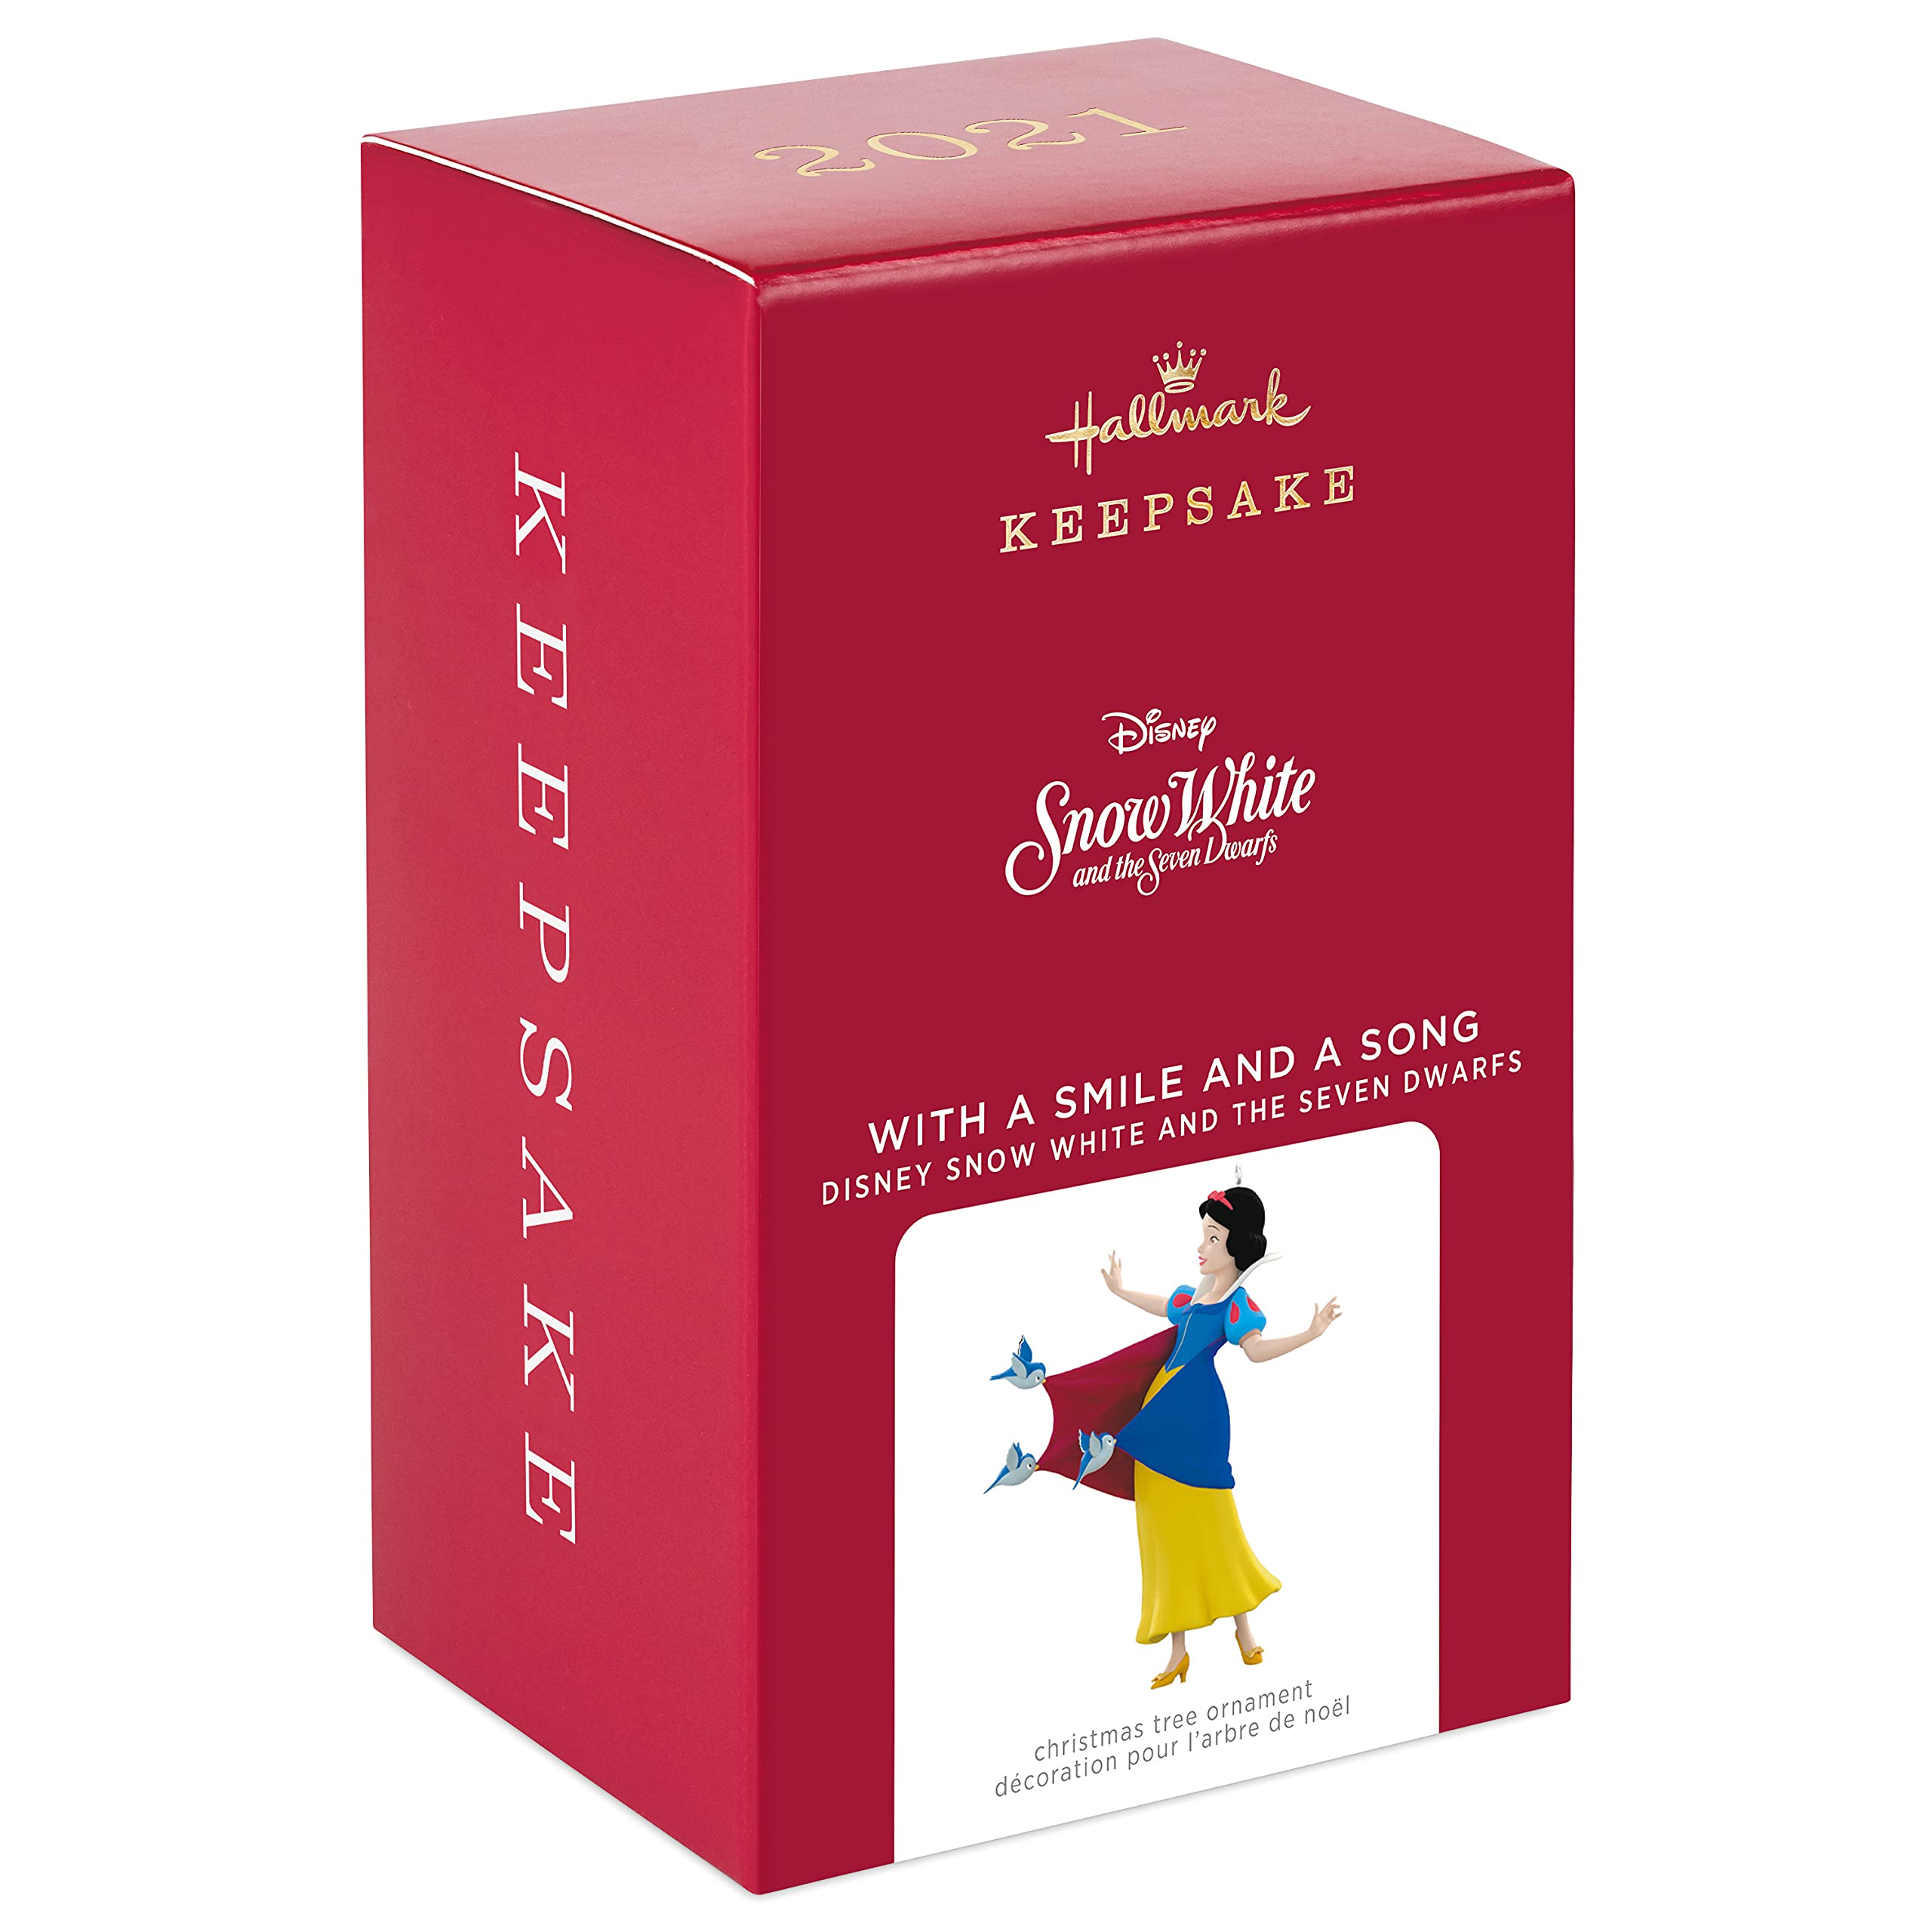 Hallmark Keepsake Christmas Ornament 2021, Disney Snow White and The Seven Dwarfs with a Smile and a Song